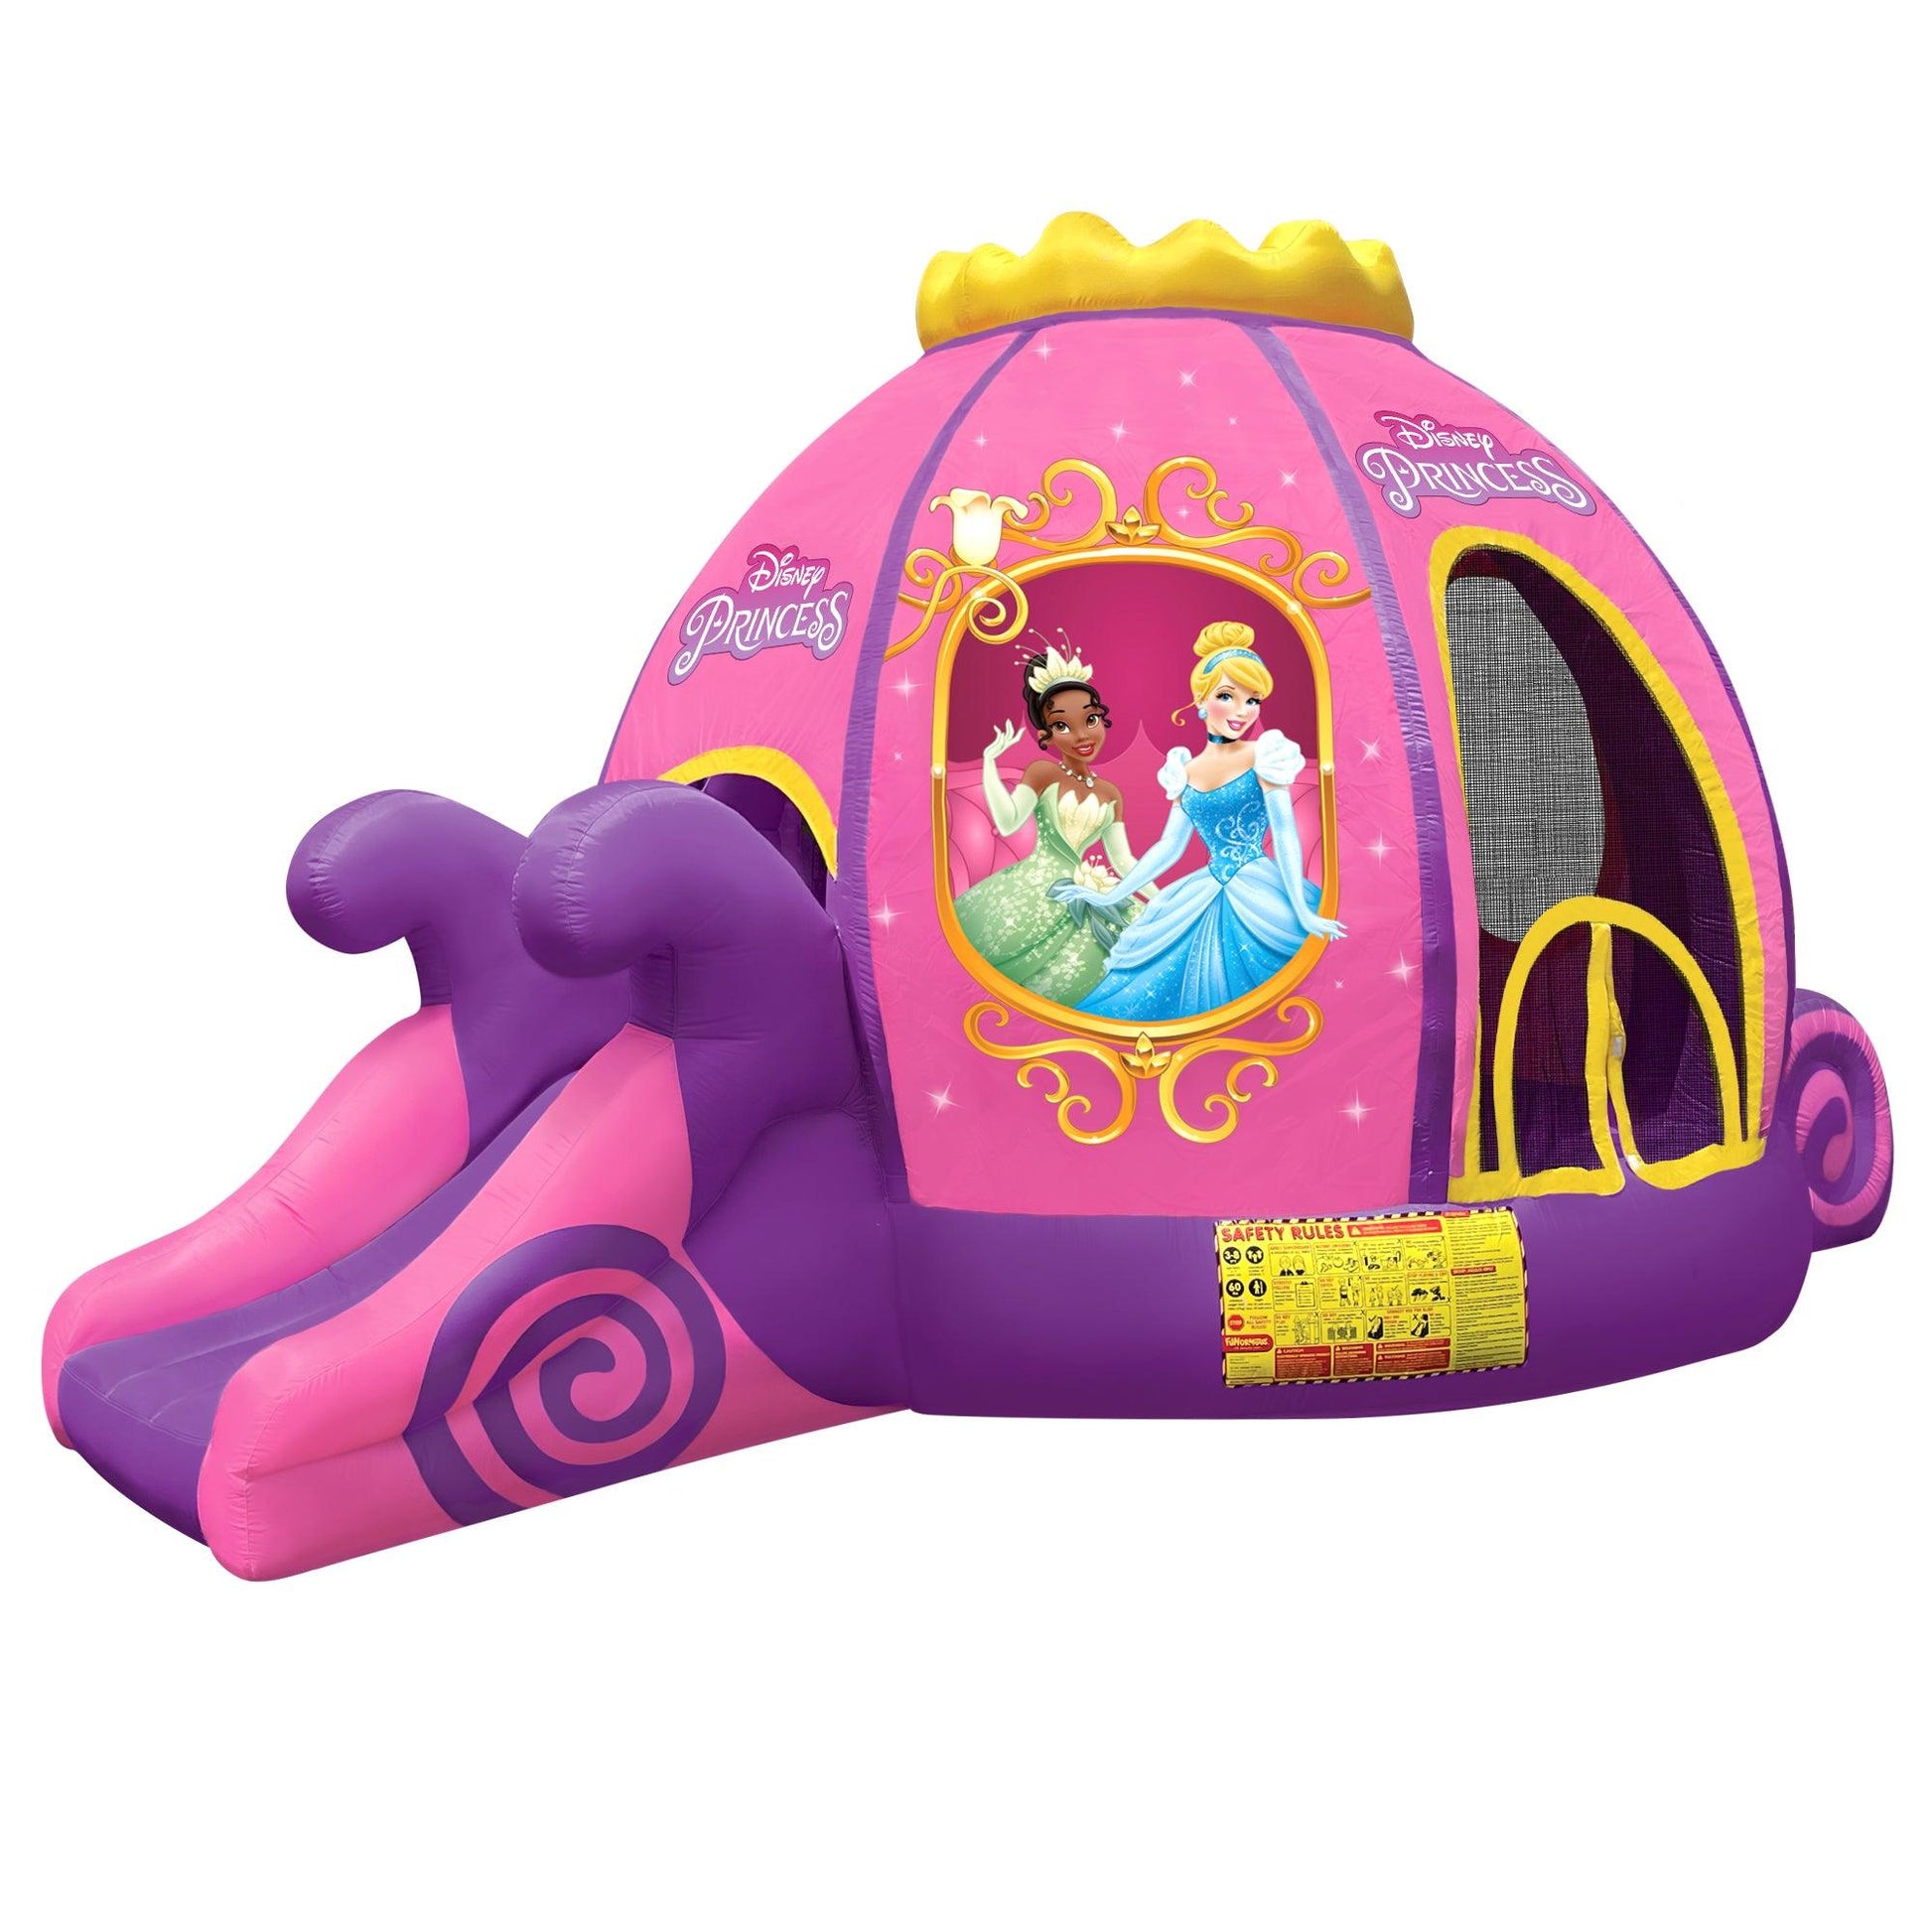 Disney Princess Carriage Inflatable Bounce House